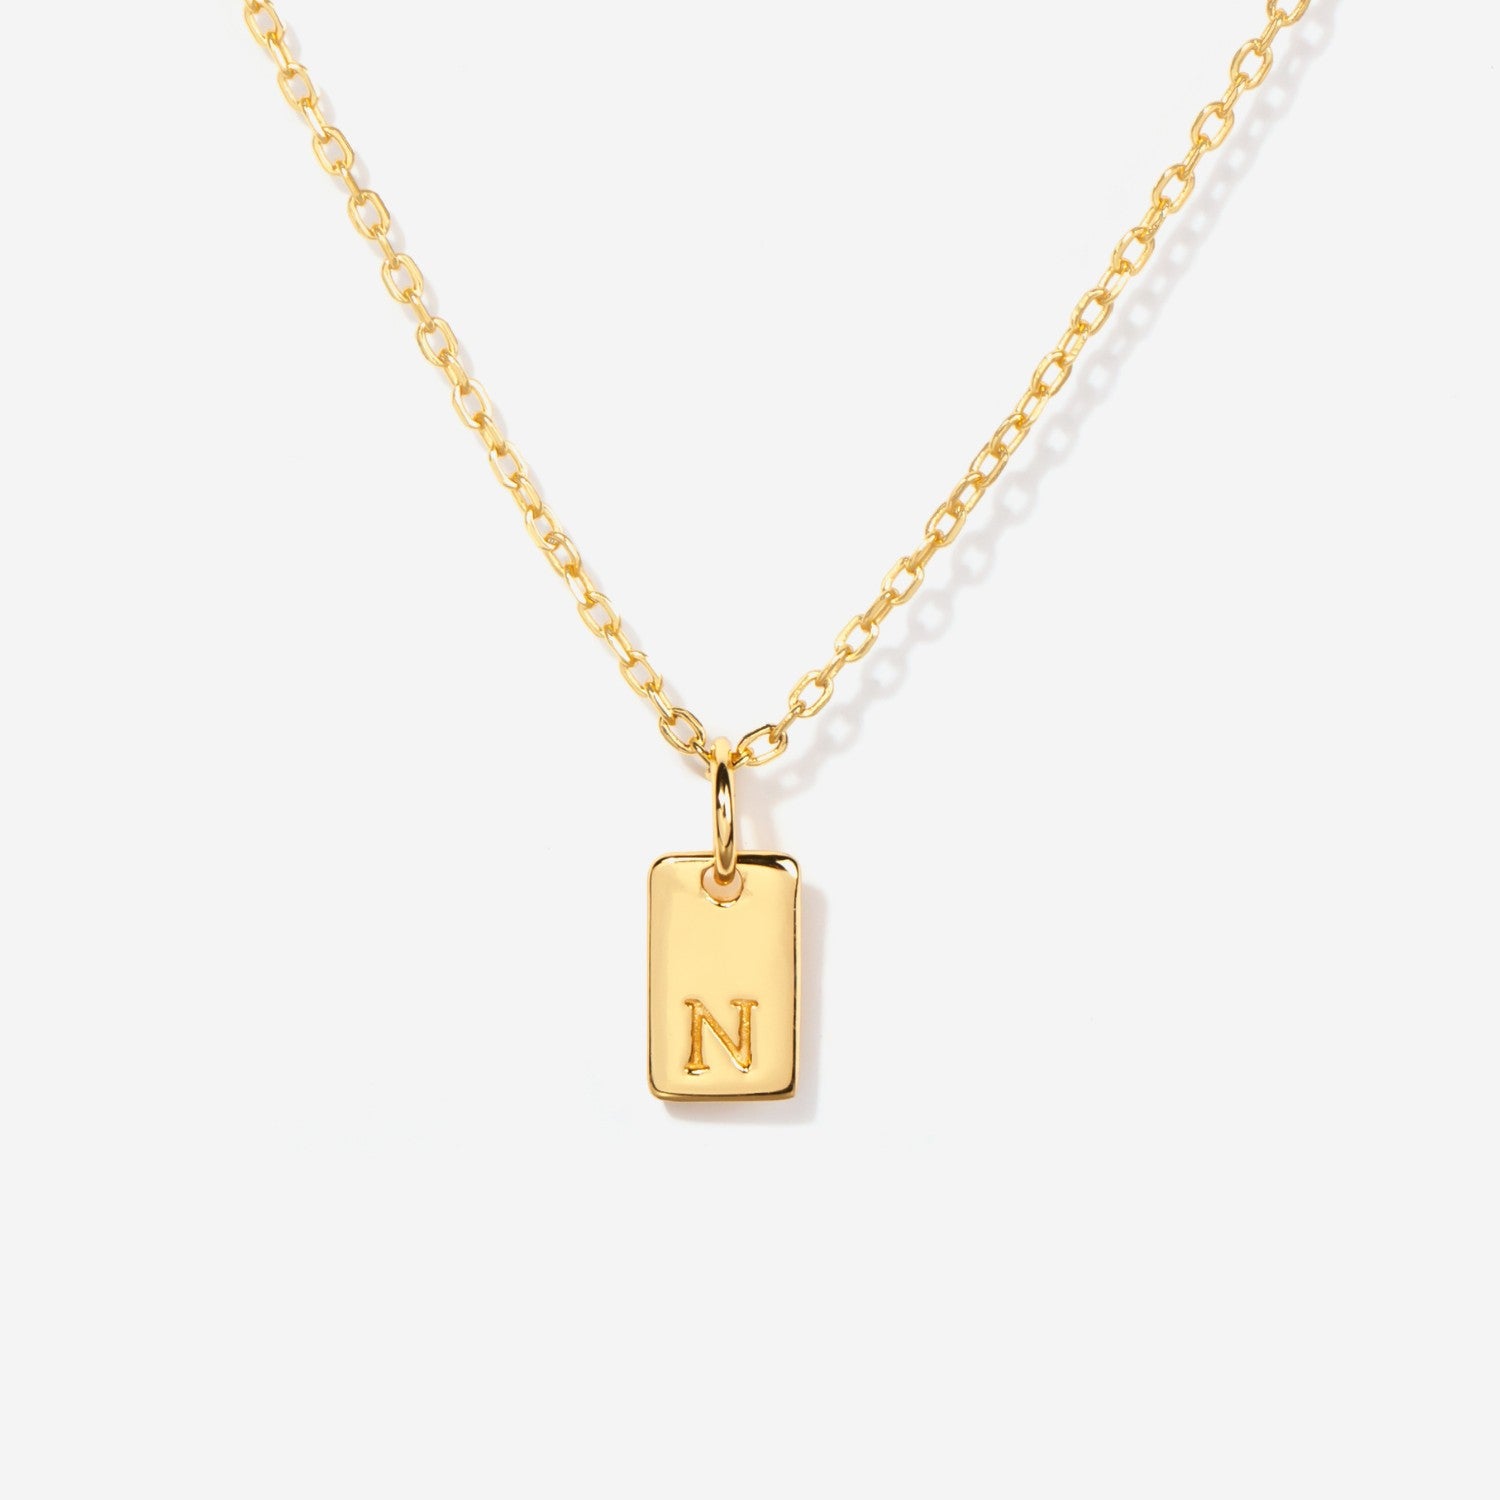 Tag Initial Necklace For Mom in 14k Gold Filled | Little Sky Stone